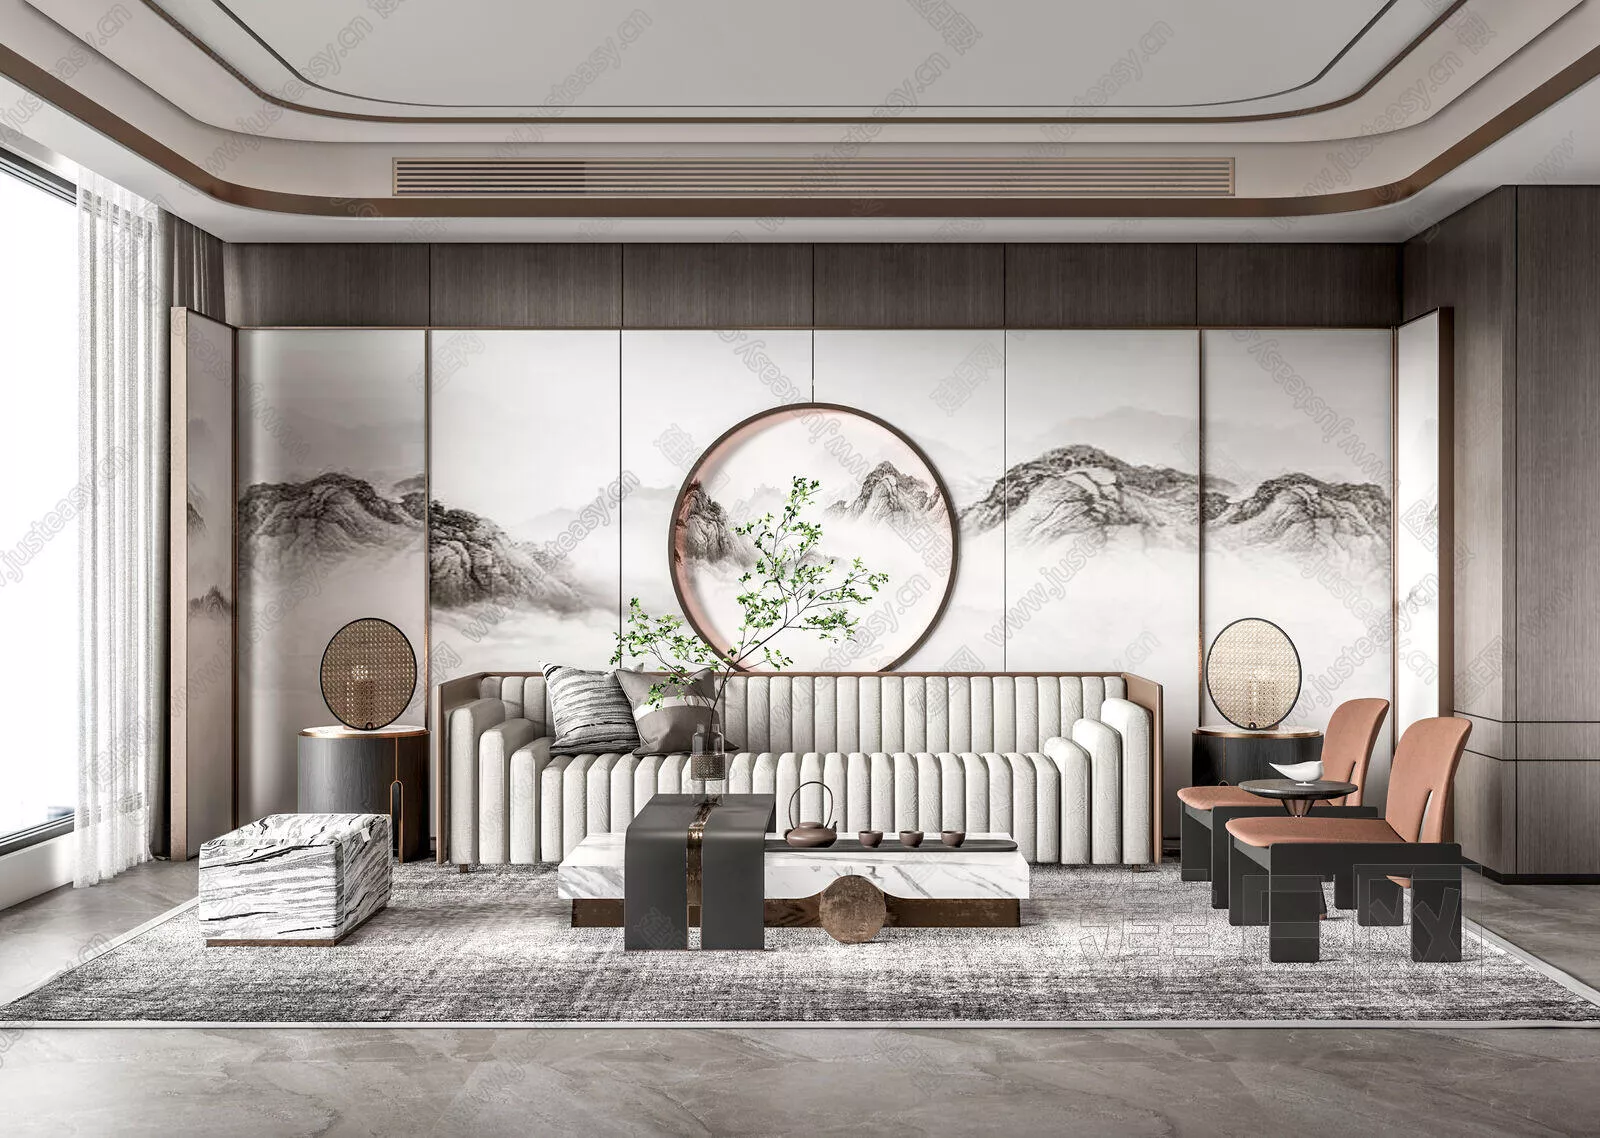 CHINESE LIVING ROOM - SKETCHUP 3D SCENE - ENSCAPE - 113525853